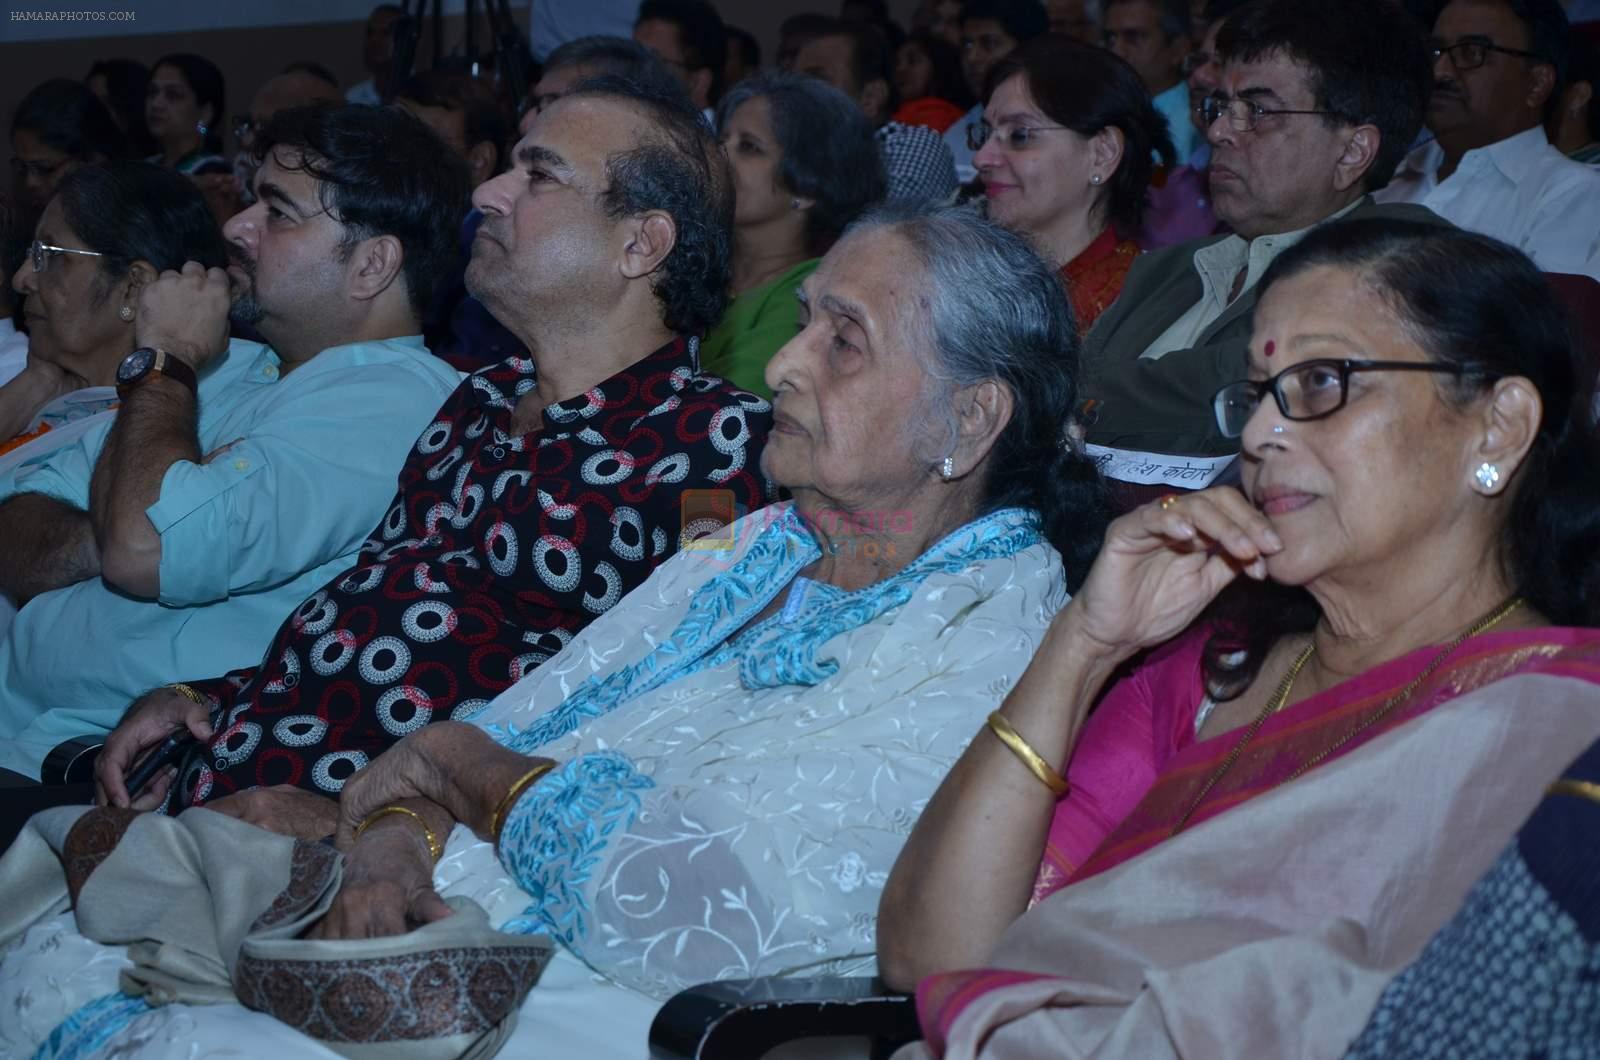 Suresh Wadkar at a book reading at Marathi event on 16th June 2015